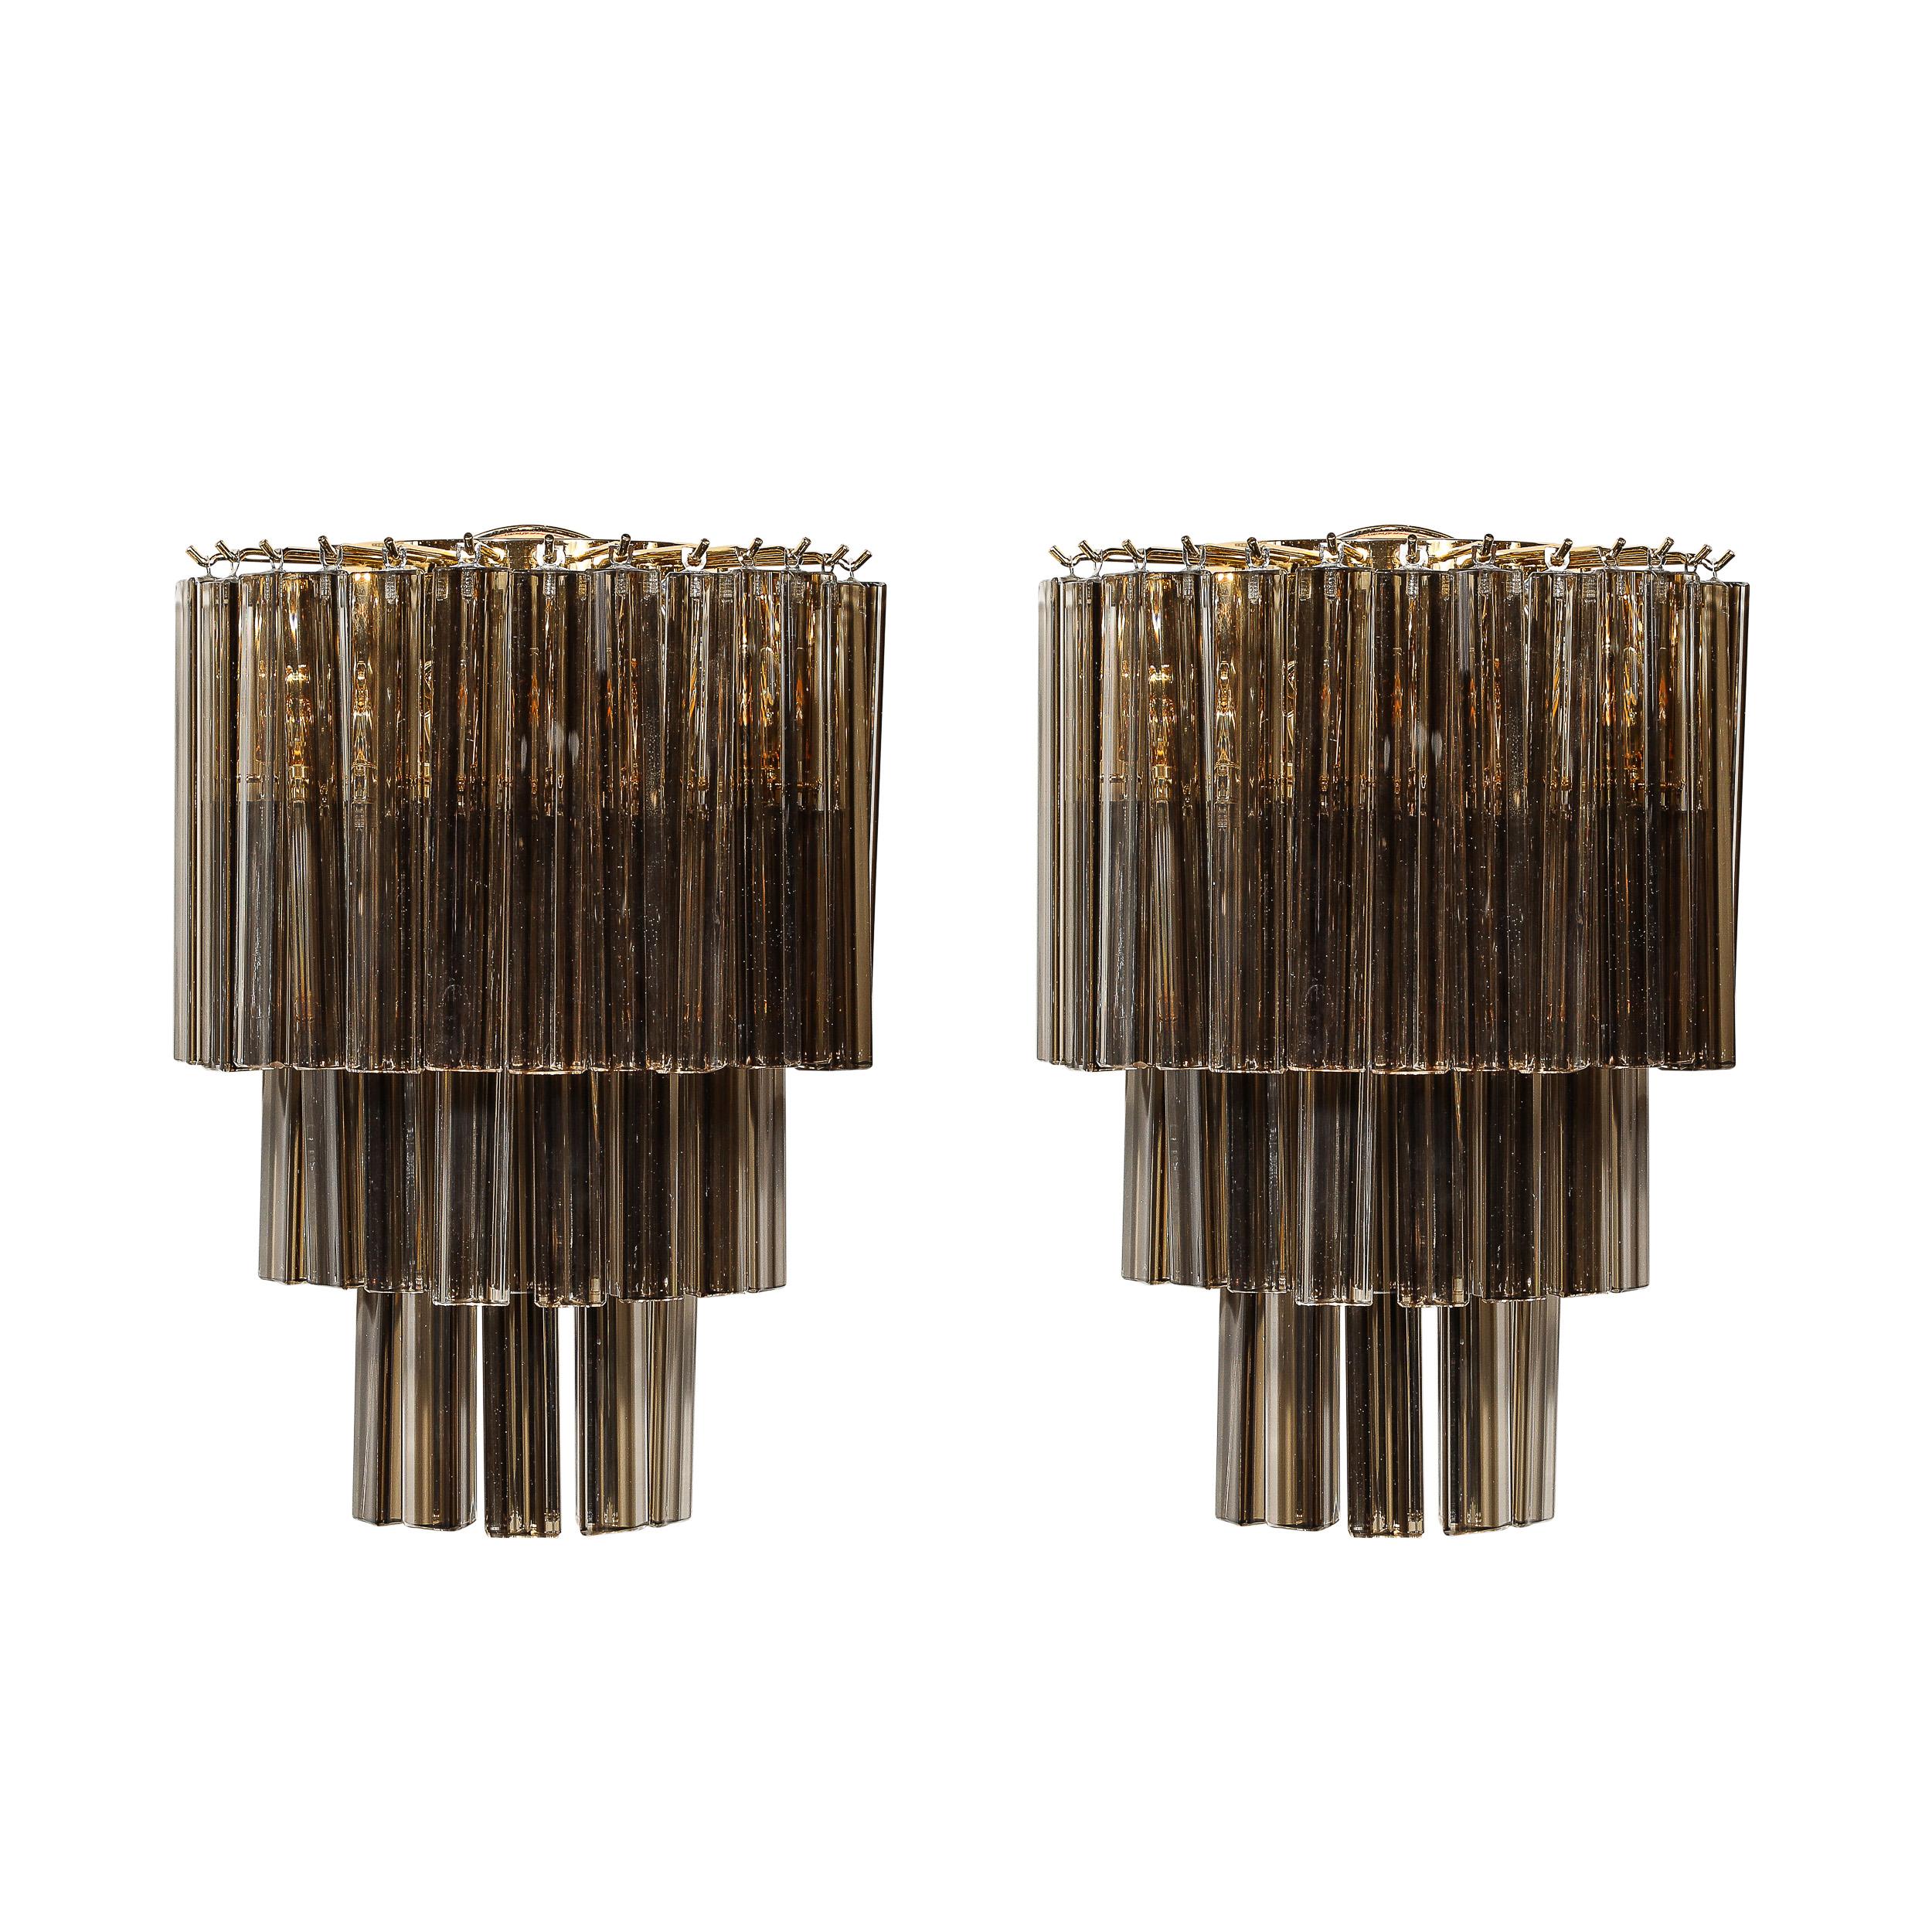 This gleaming and elegant Pair of Mid-Century Modernist Hand-Blown Murano Glass Three-Tier Triedre Sconces In Smoked Bronze W/ Brass Fittings originate from Italy, Circa 1970. They feature a tiered composition of hand-blown smoked bronze murano